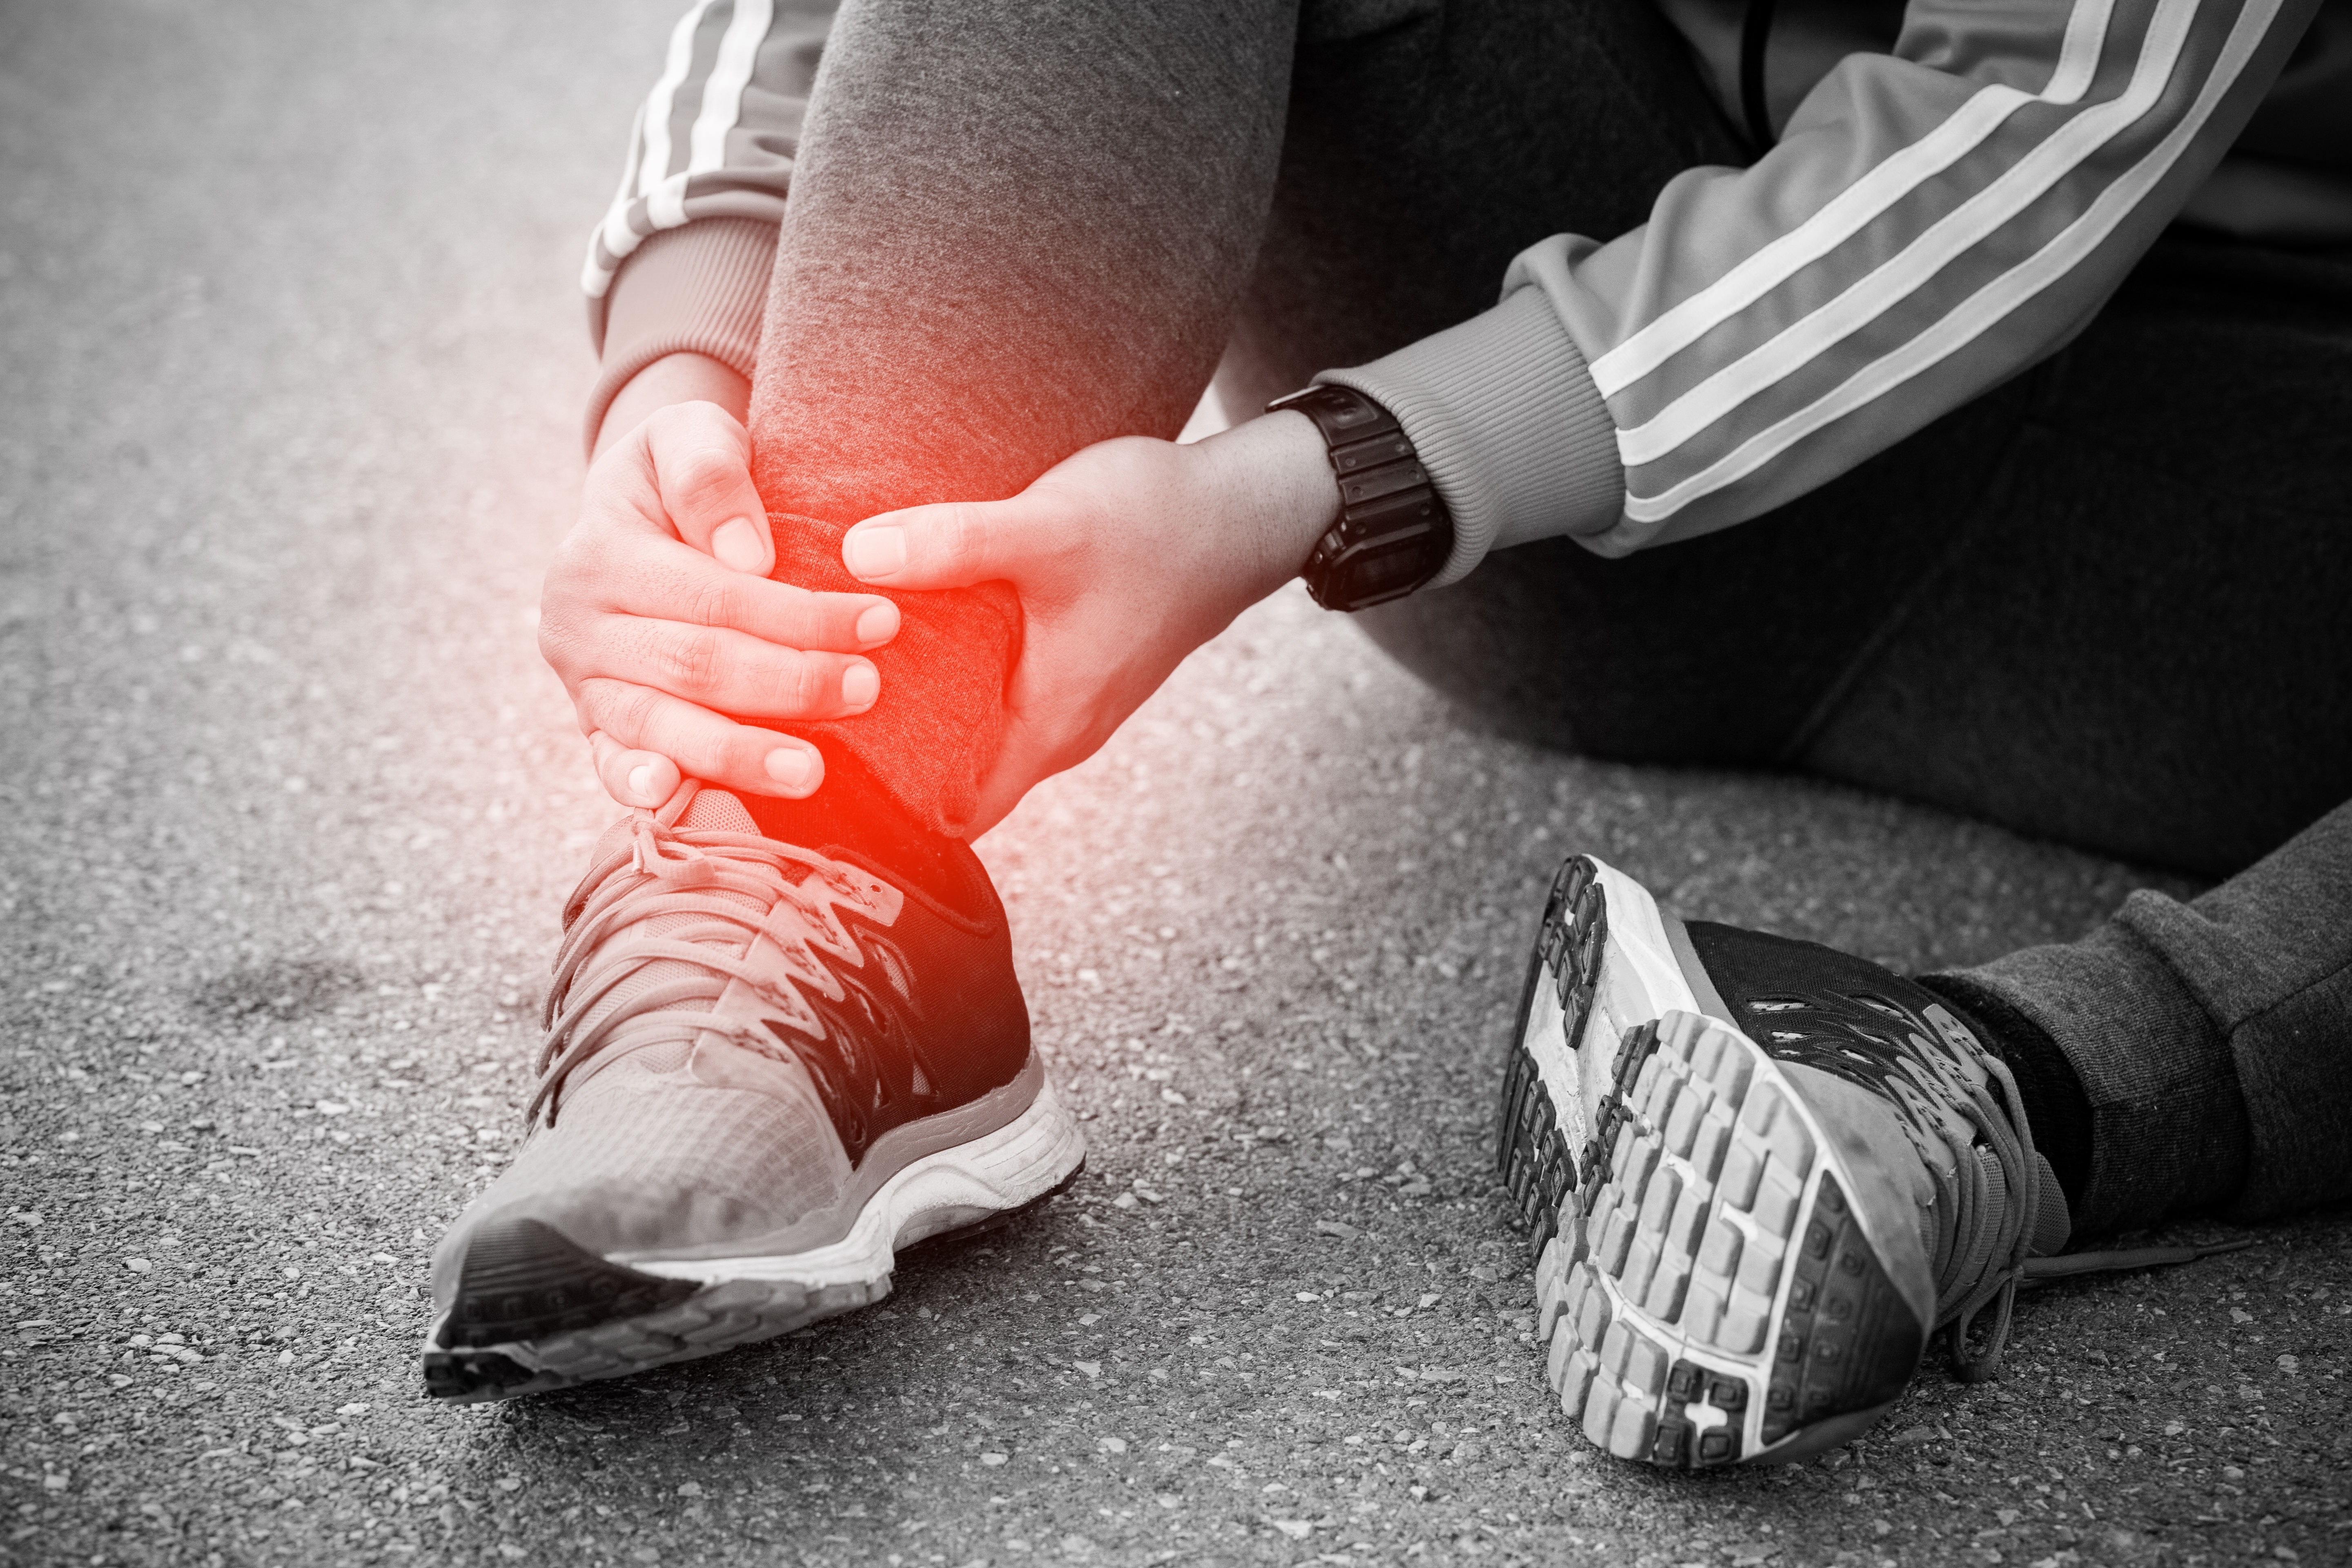 Fat-Burning Cardio Exercises You Can Do with Sprained Ankle